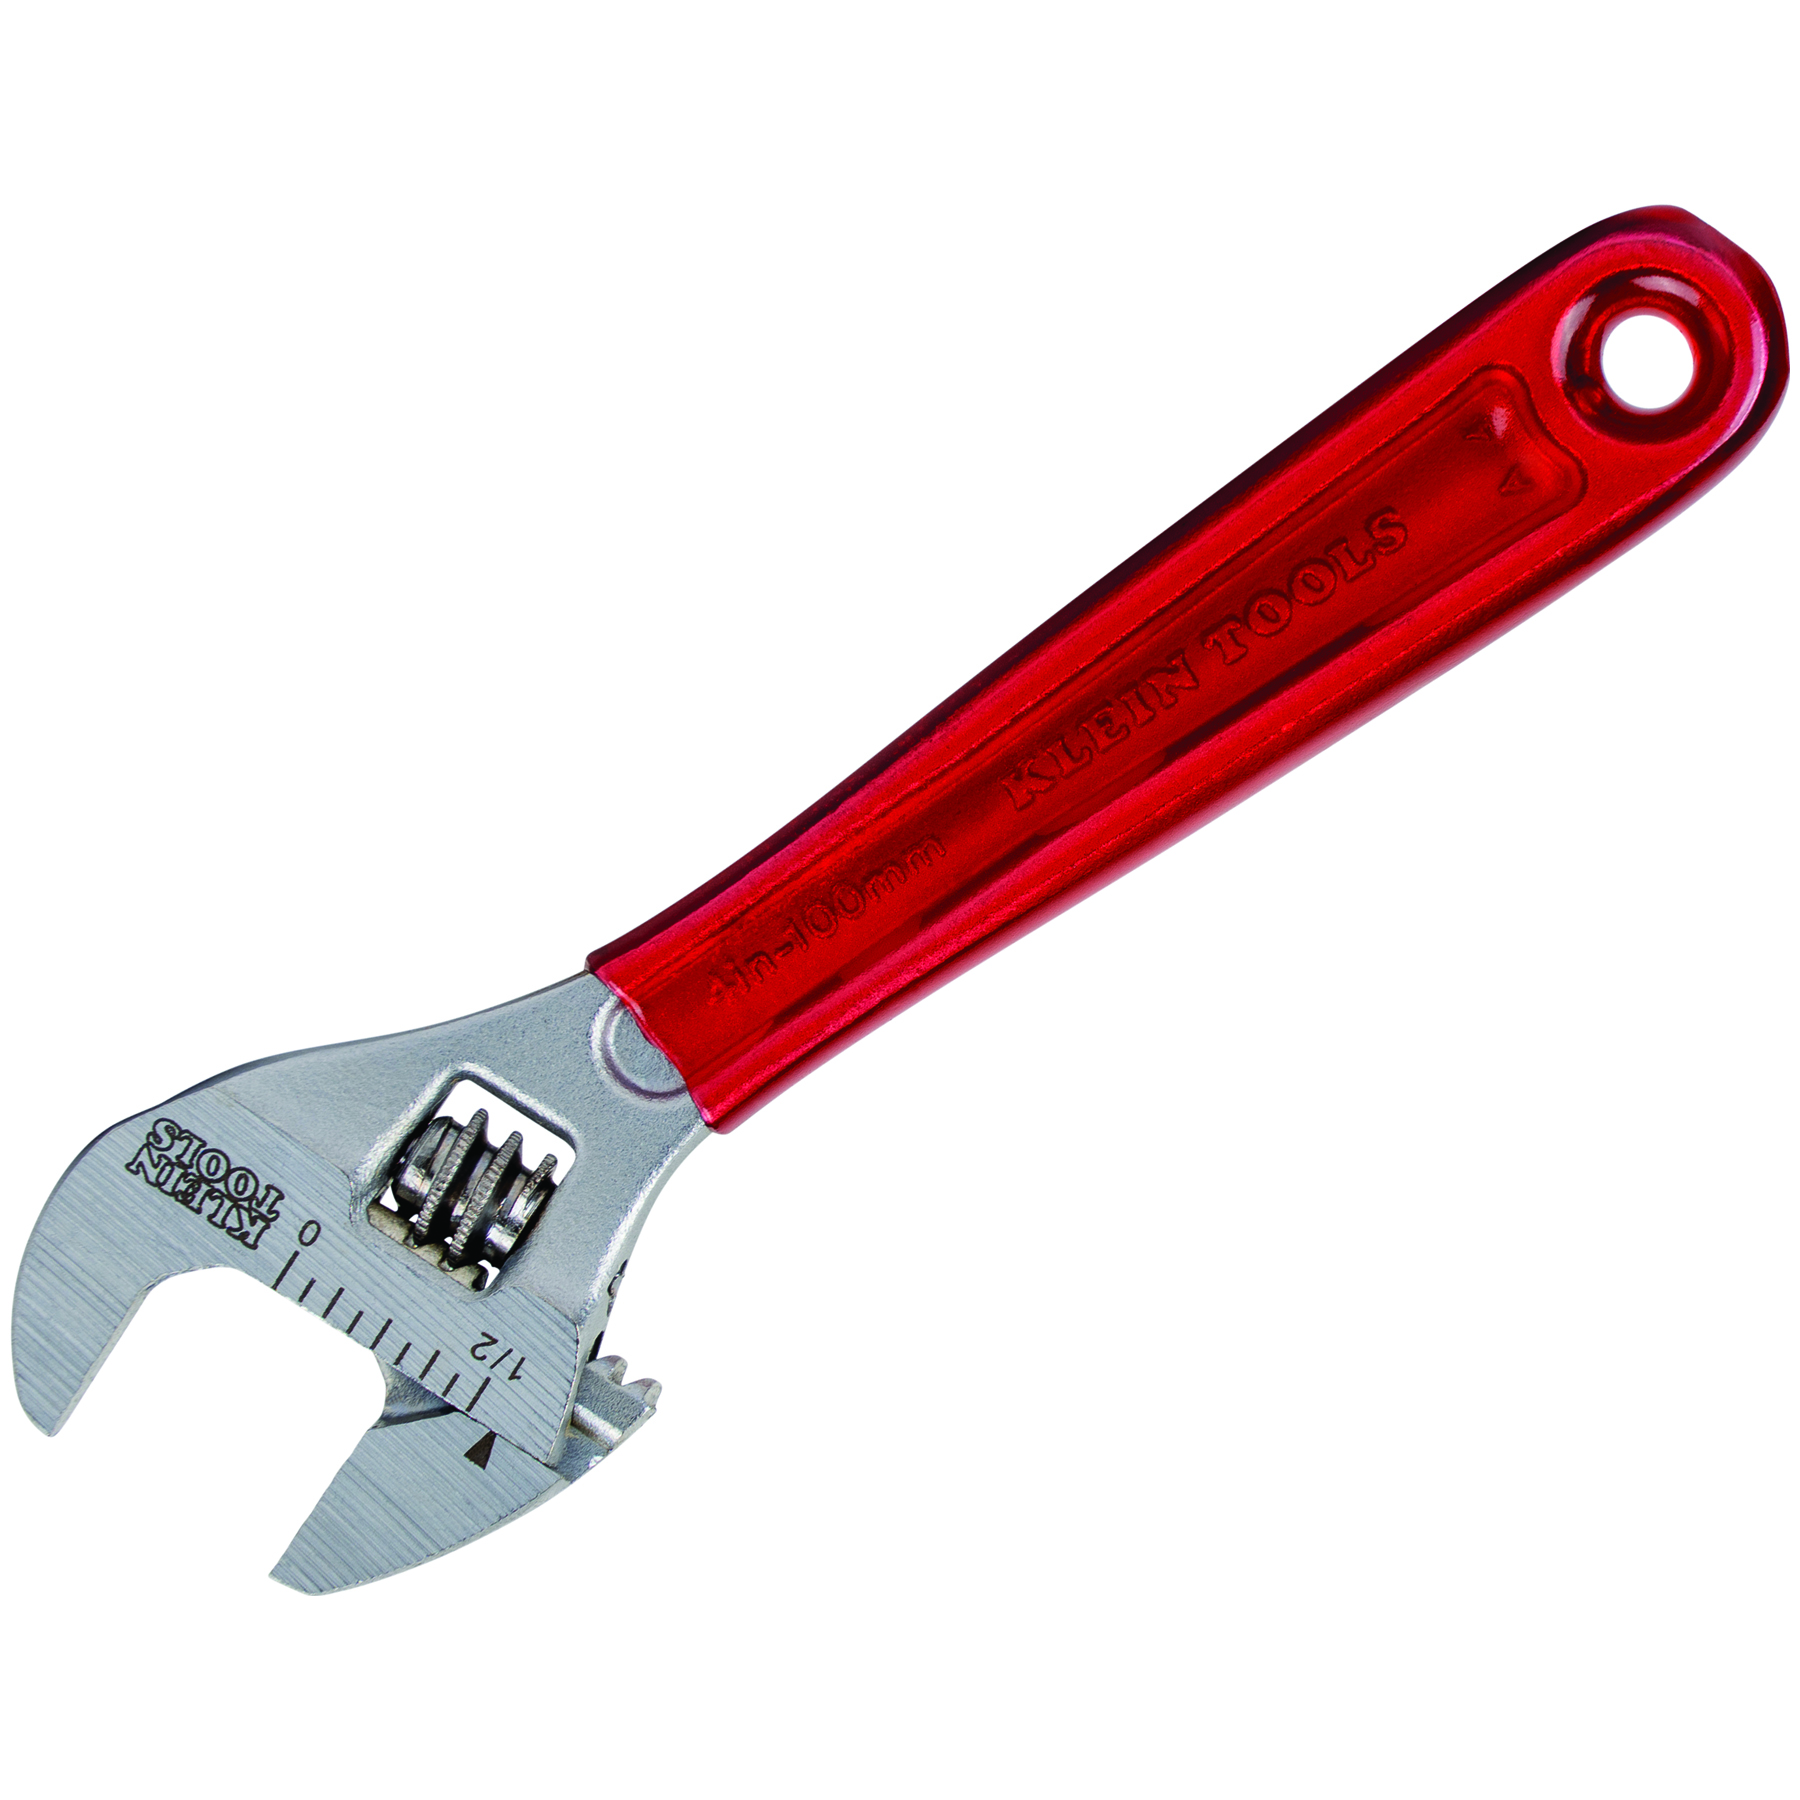 ADJUSTABLE WRENCH PLASTIC DIPPED 4IN